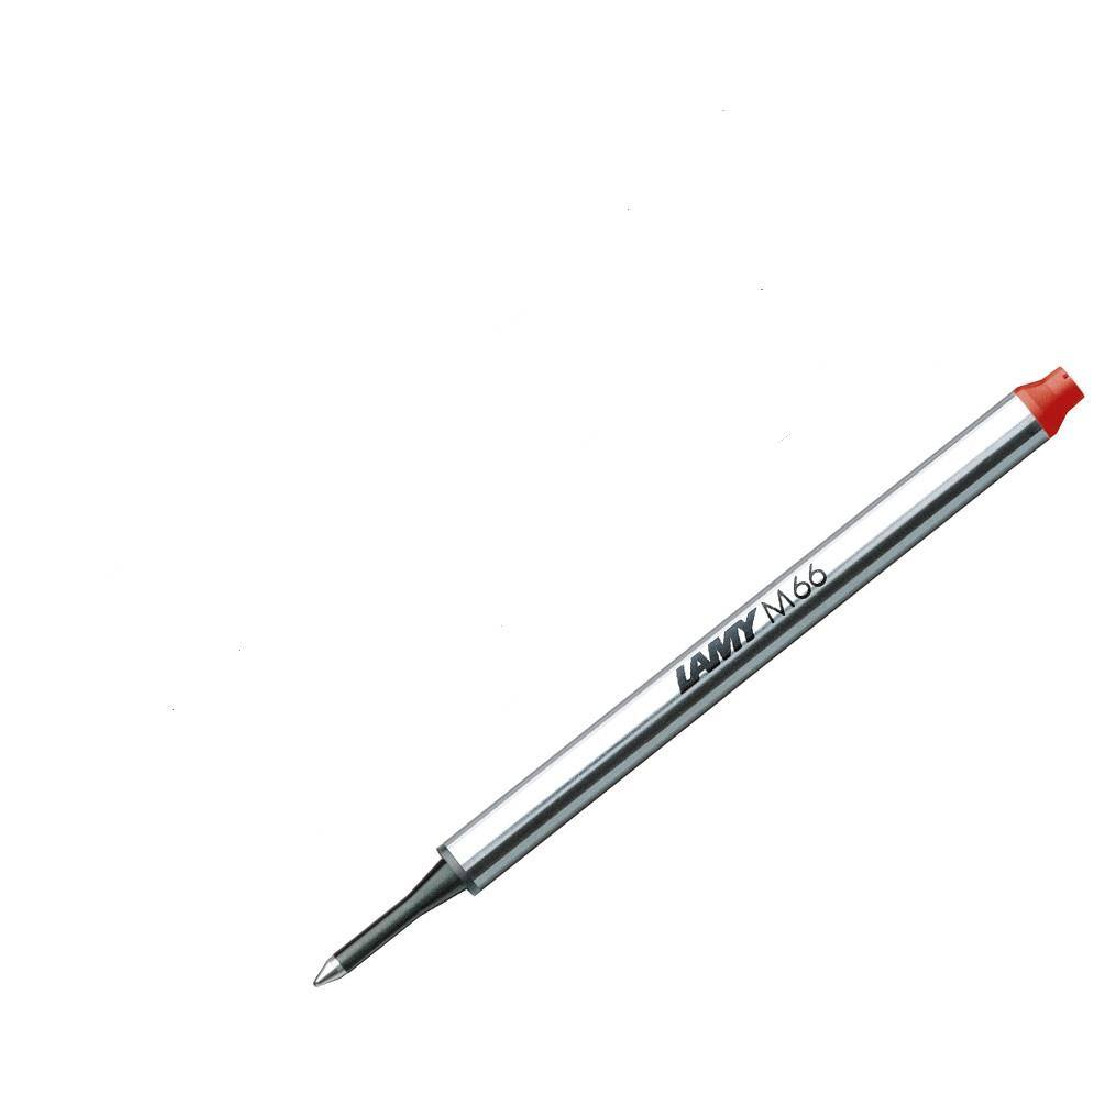 REFILL LAMY M66 M RED ROLLERBALL